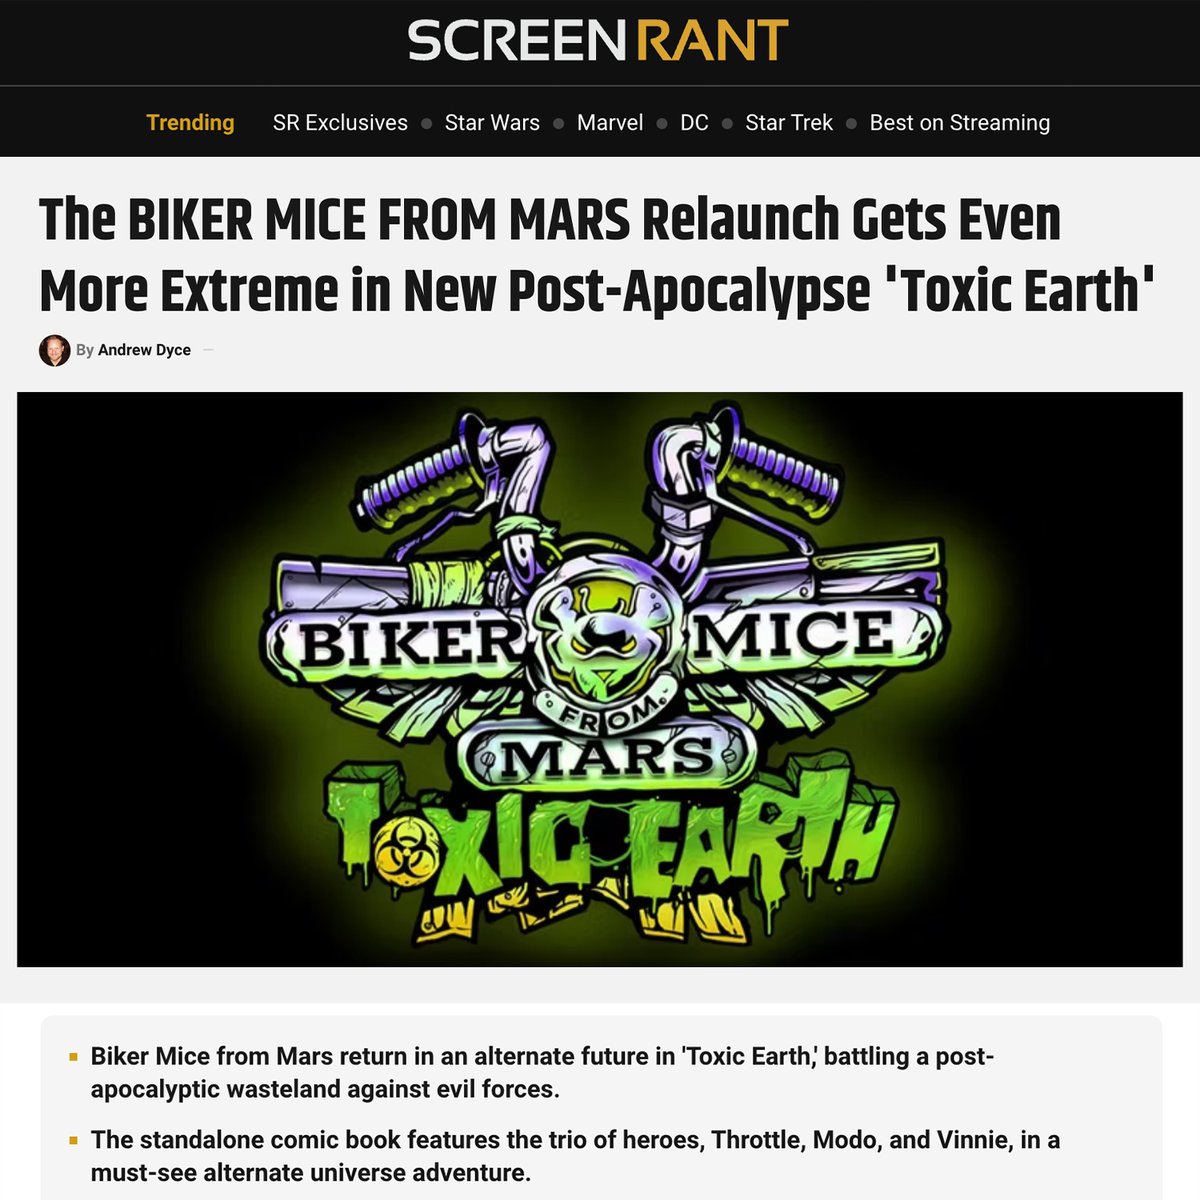 The BIKER MICE FROM MARS Relaunch Gets Even More Extreme in New Post-Apocalypse 'Toxic Earth' screenrant.com/biker-mice-fro…